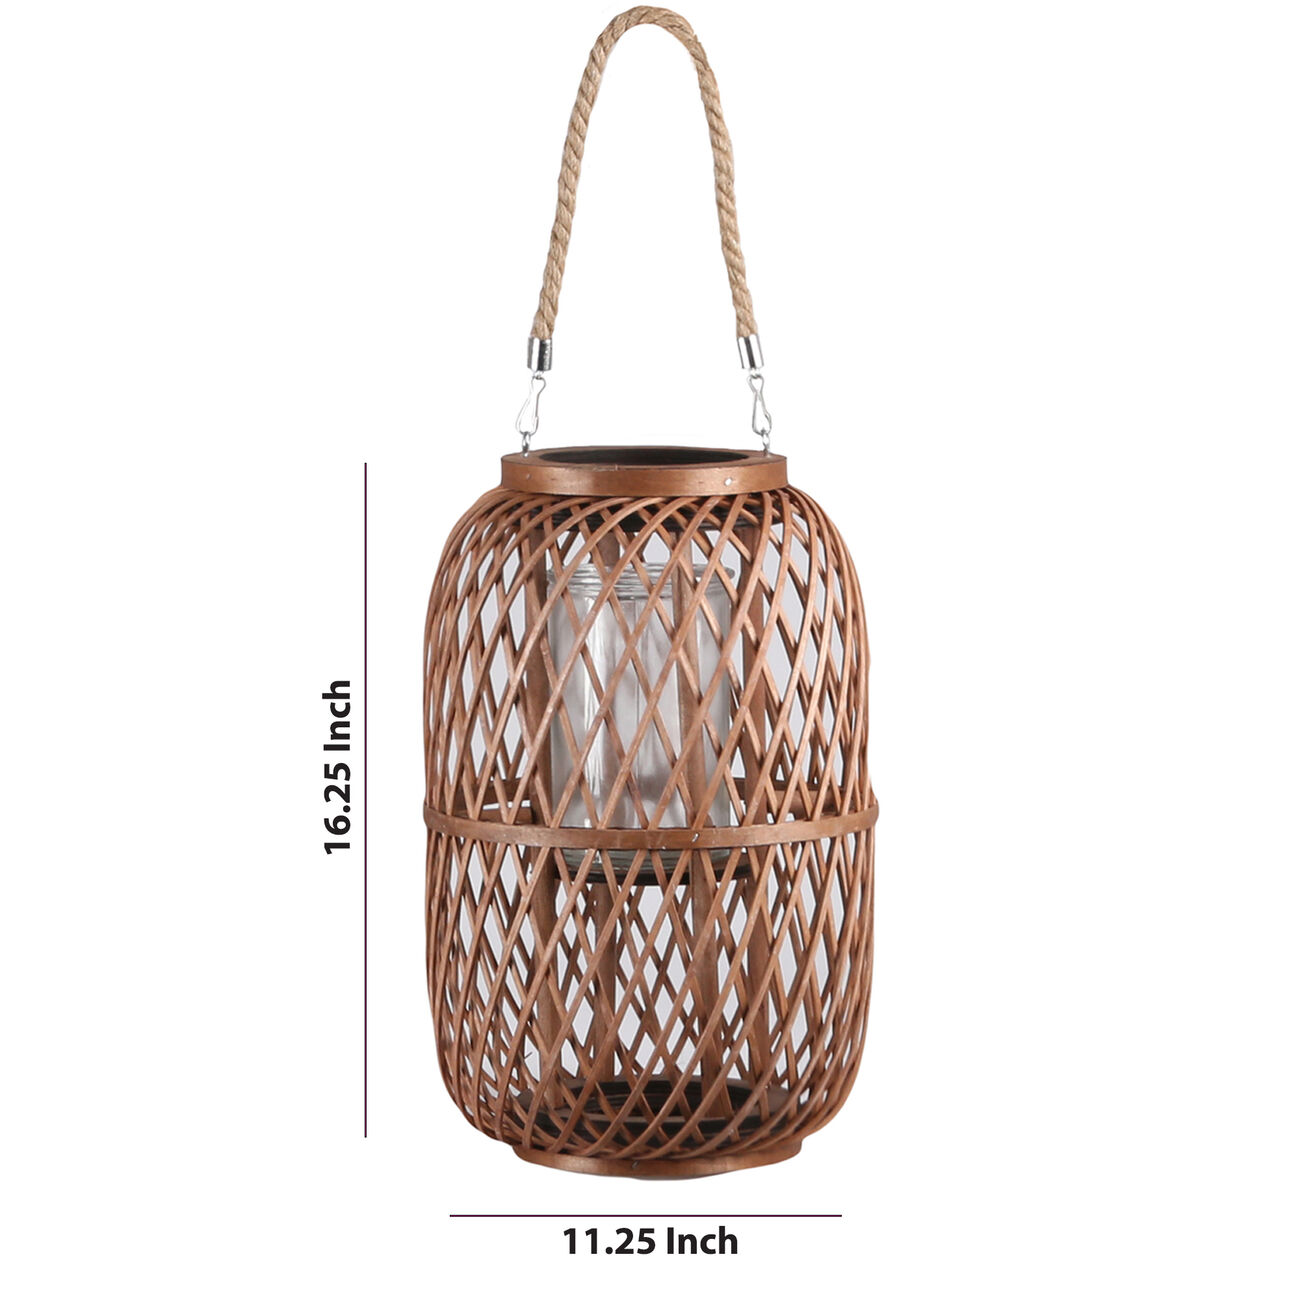 16.25 Inch Bellied Shape Lantern with Jute Handle and Lattice Design, Brown